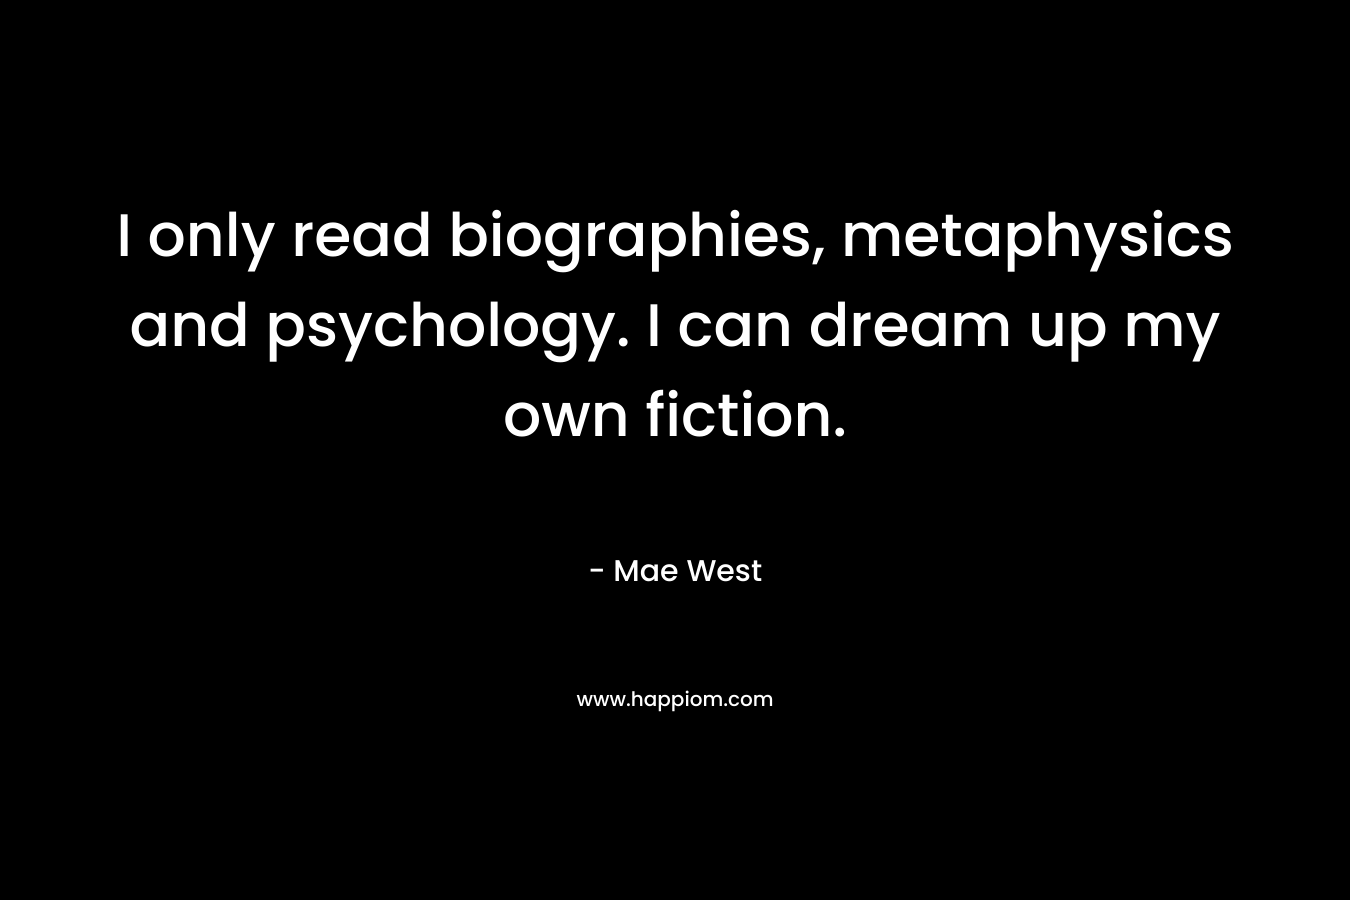 I only read biographies, metaphysics and psychology. I can dream up my own fiction.